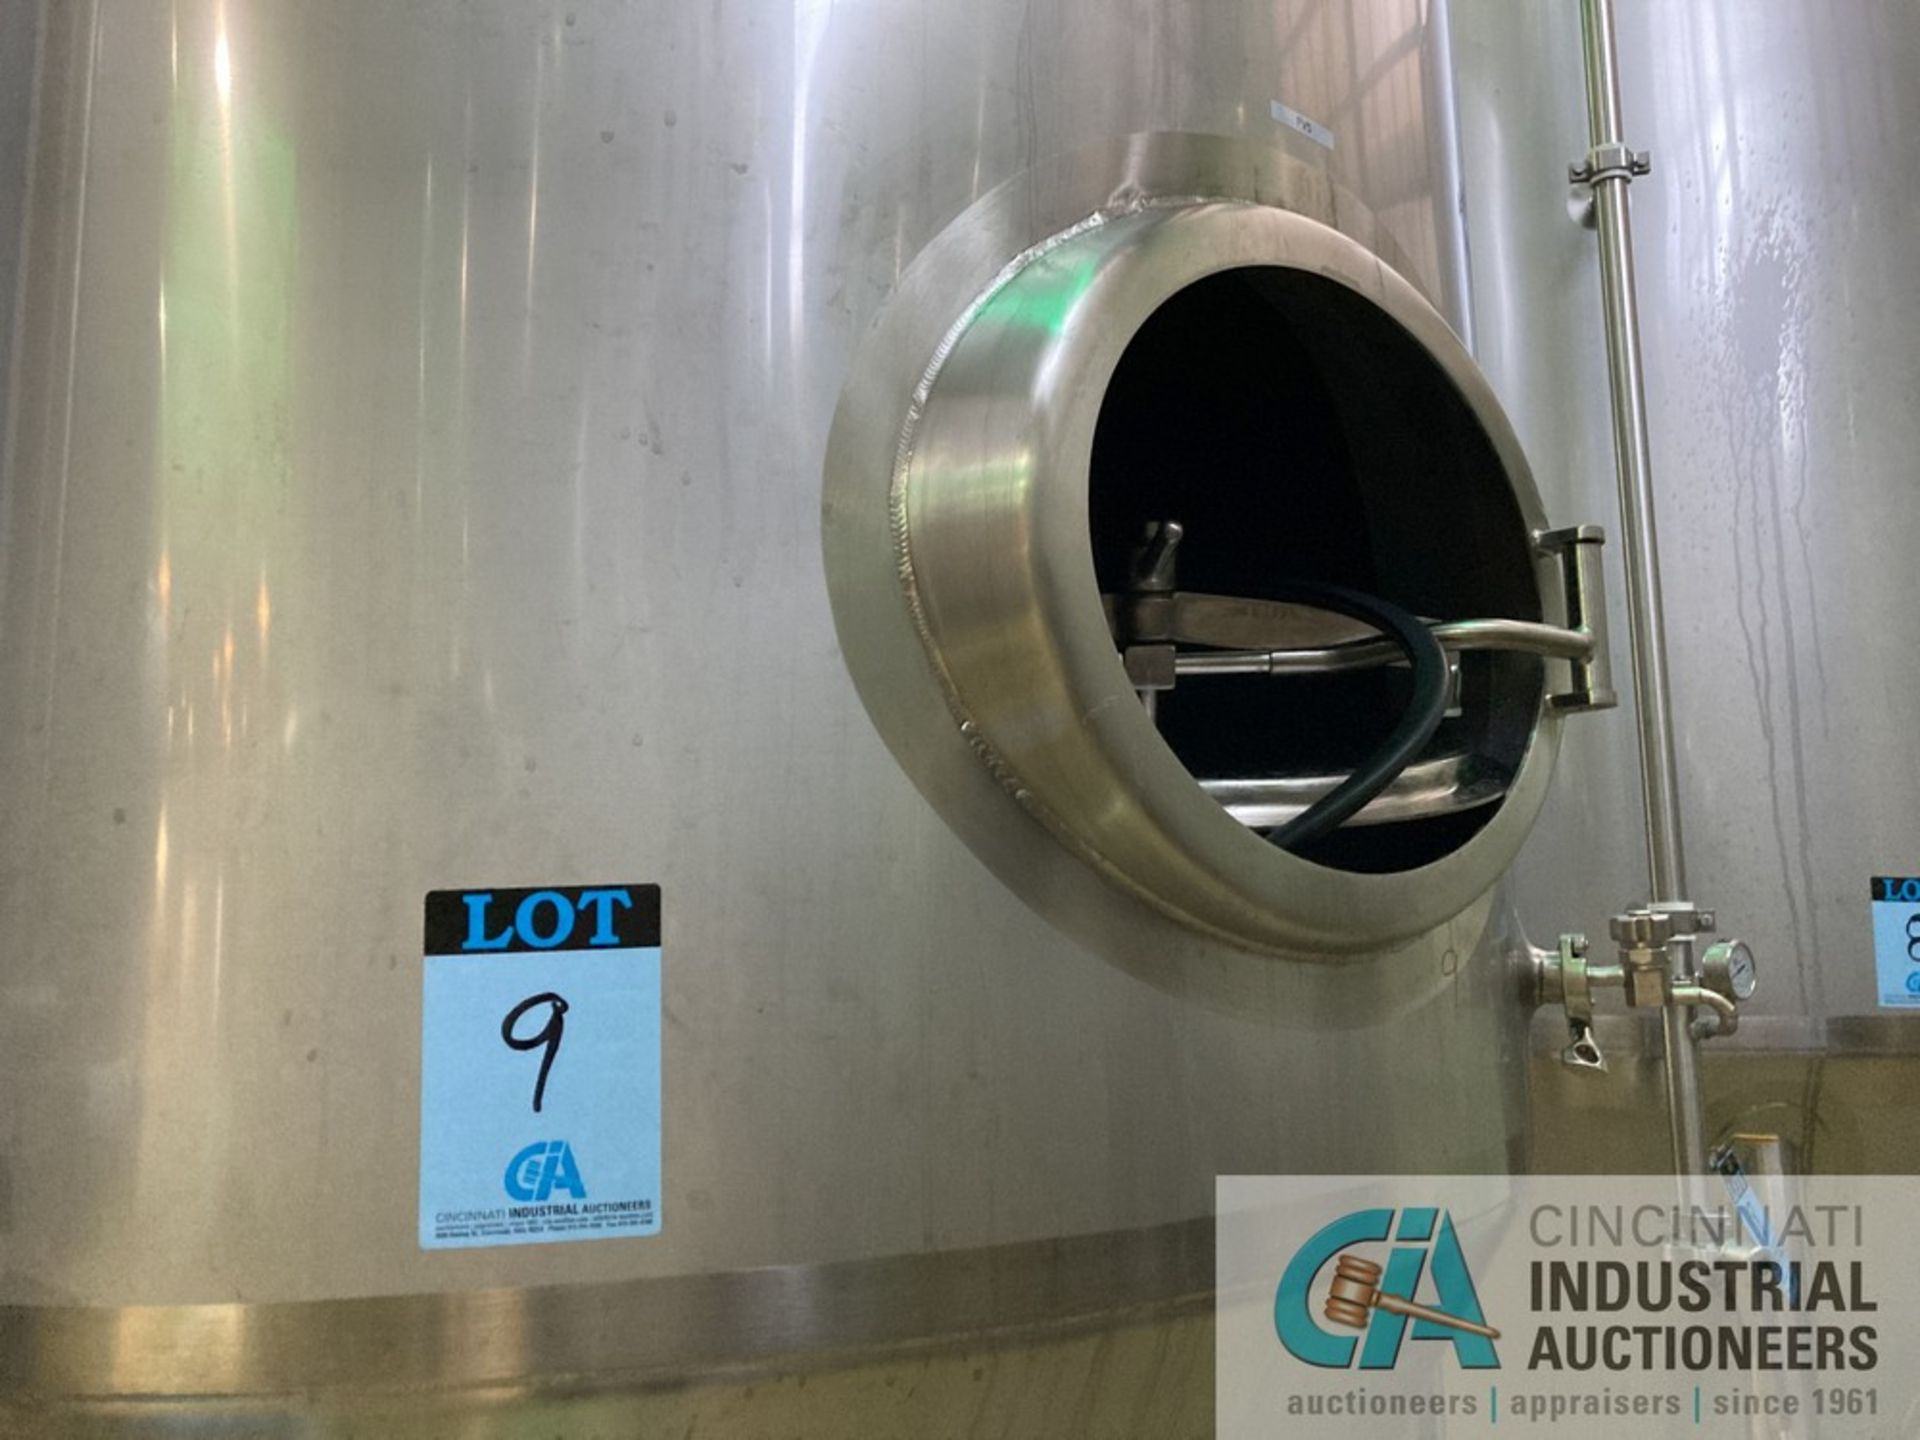 20 BBL QTS SOLUTIONS FV1 FERMENTER TANK AT 61-3/16" DIAMETER X 133" HIGH, INCLUDES SADDLES **For - Image 5 of 5